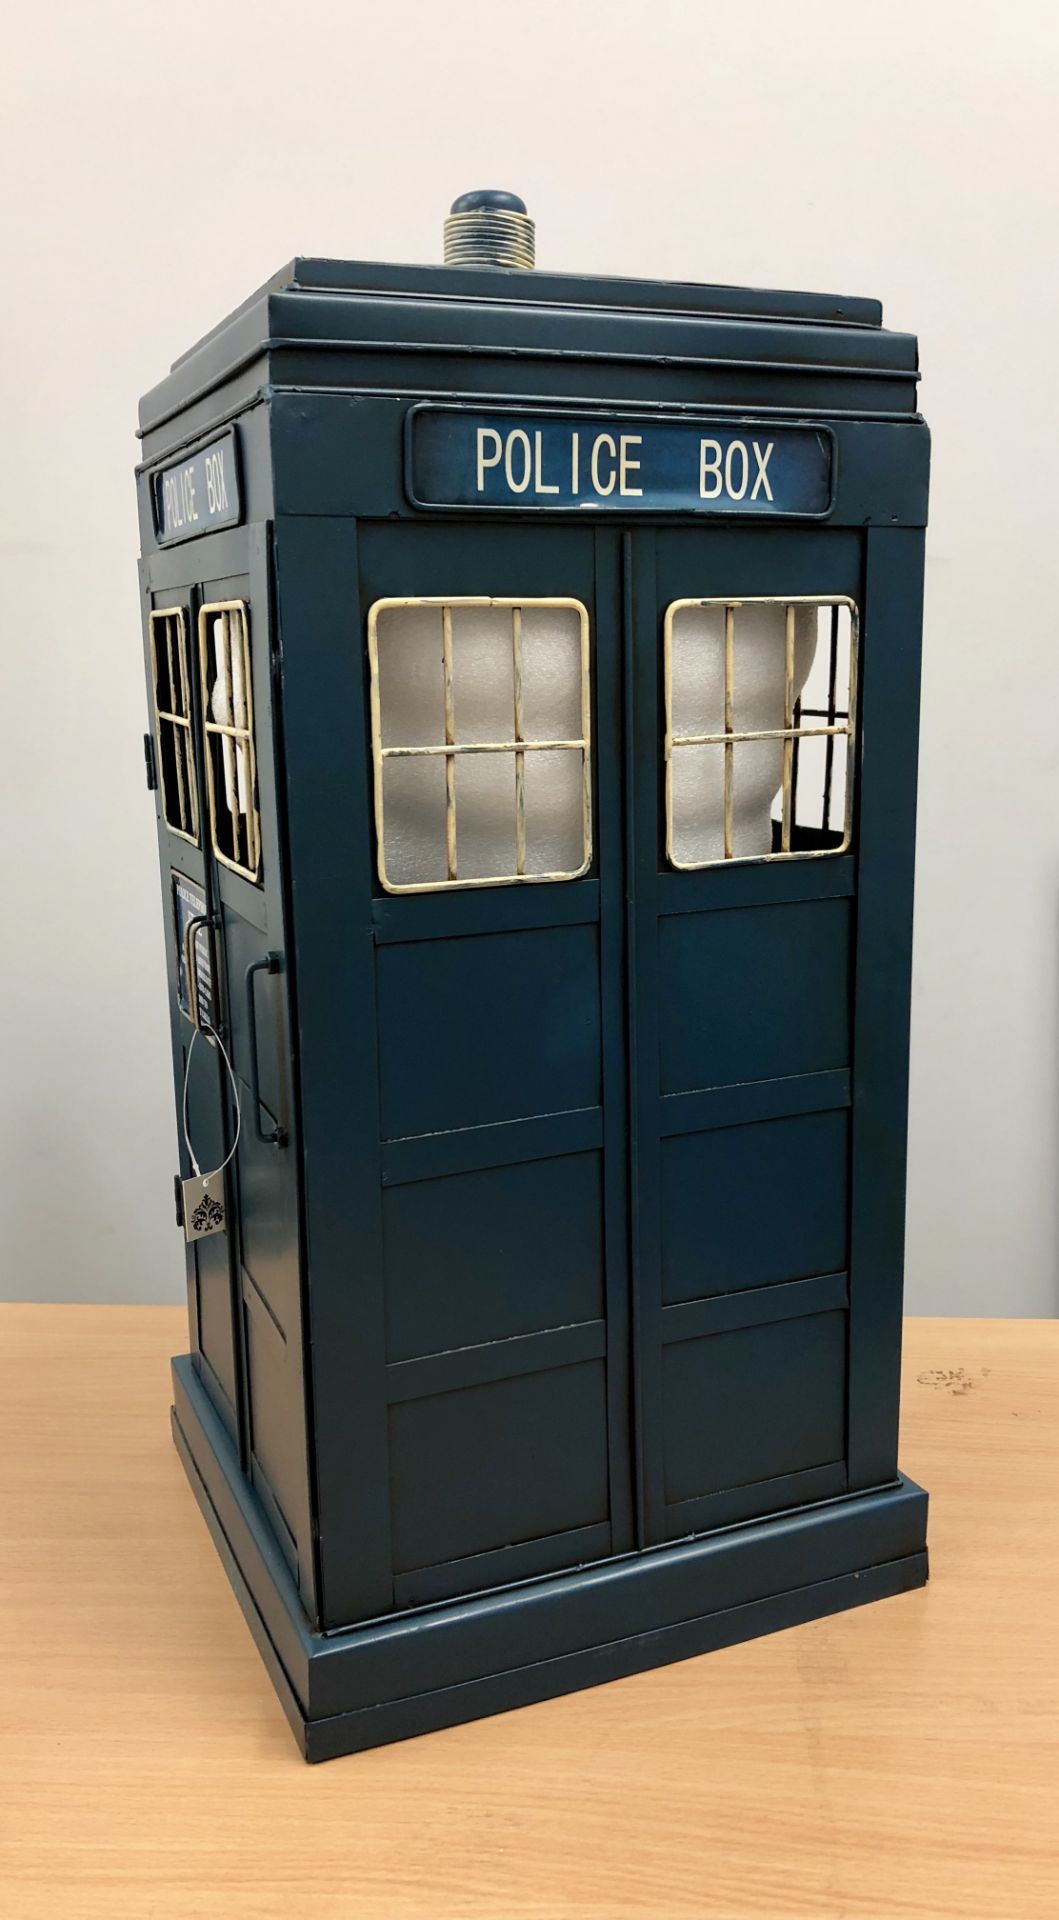 V Grade A Large Metal Police Box (Tardis) With Internal Shelf 22 Inches Tall - Image 2 of 4